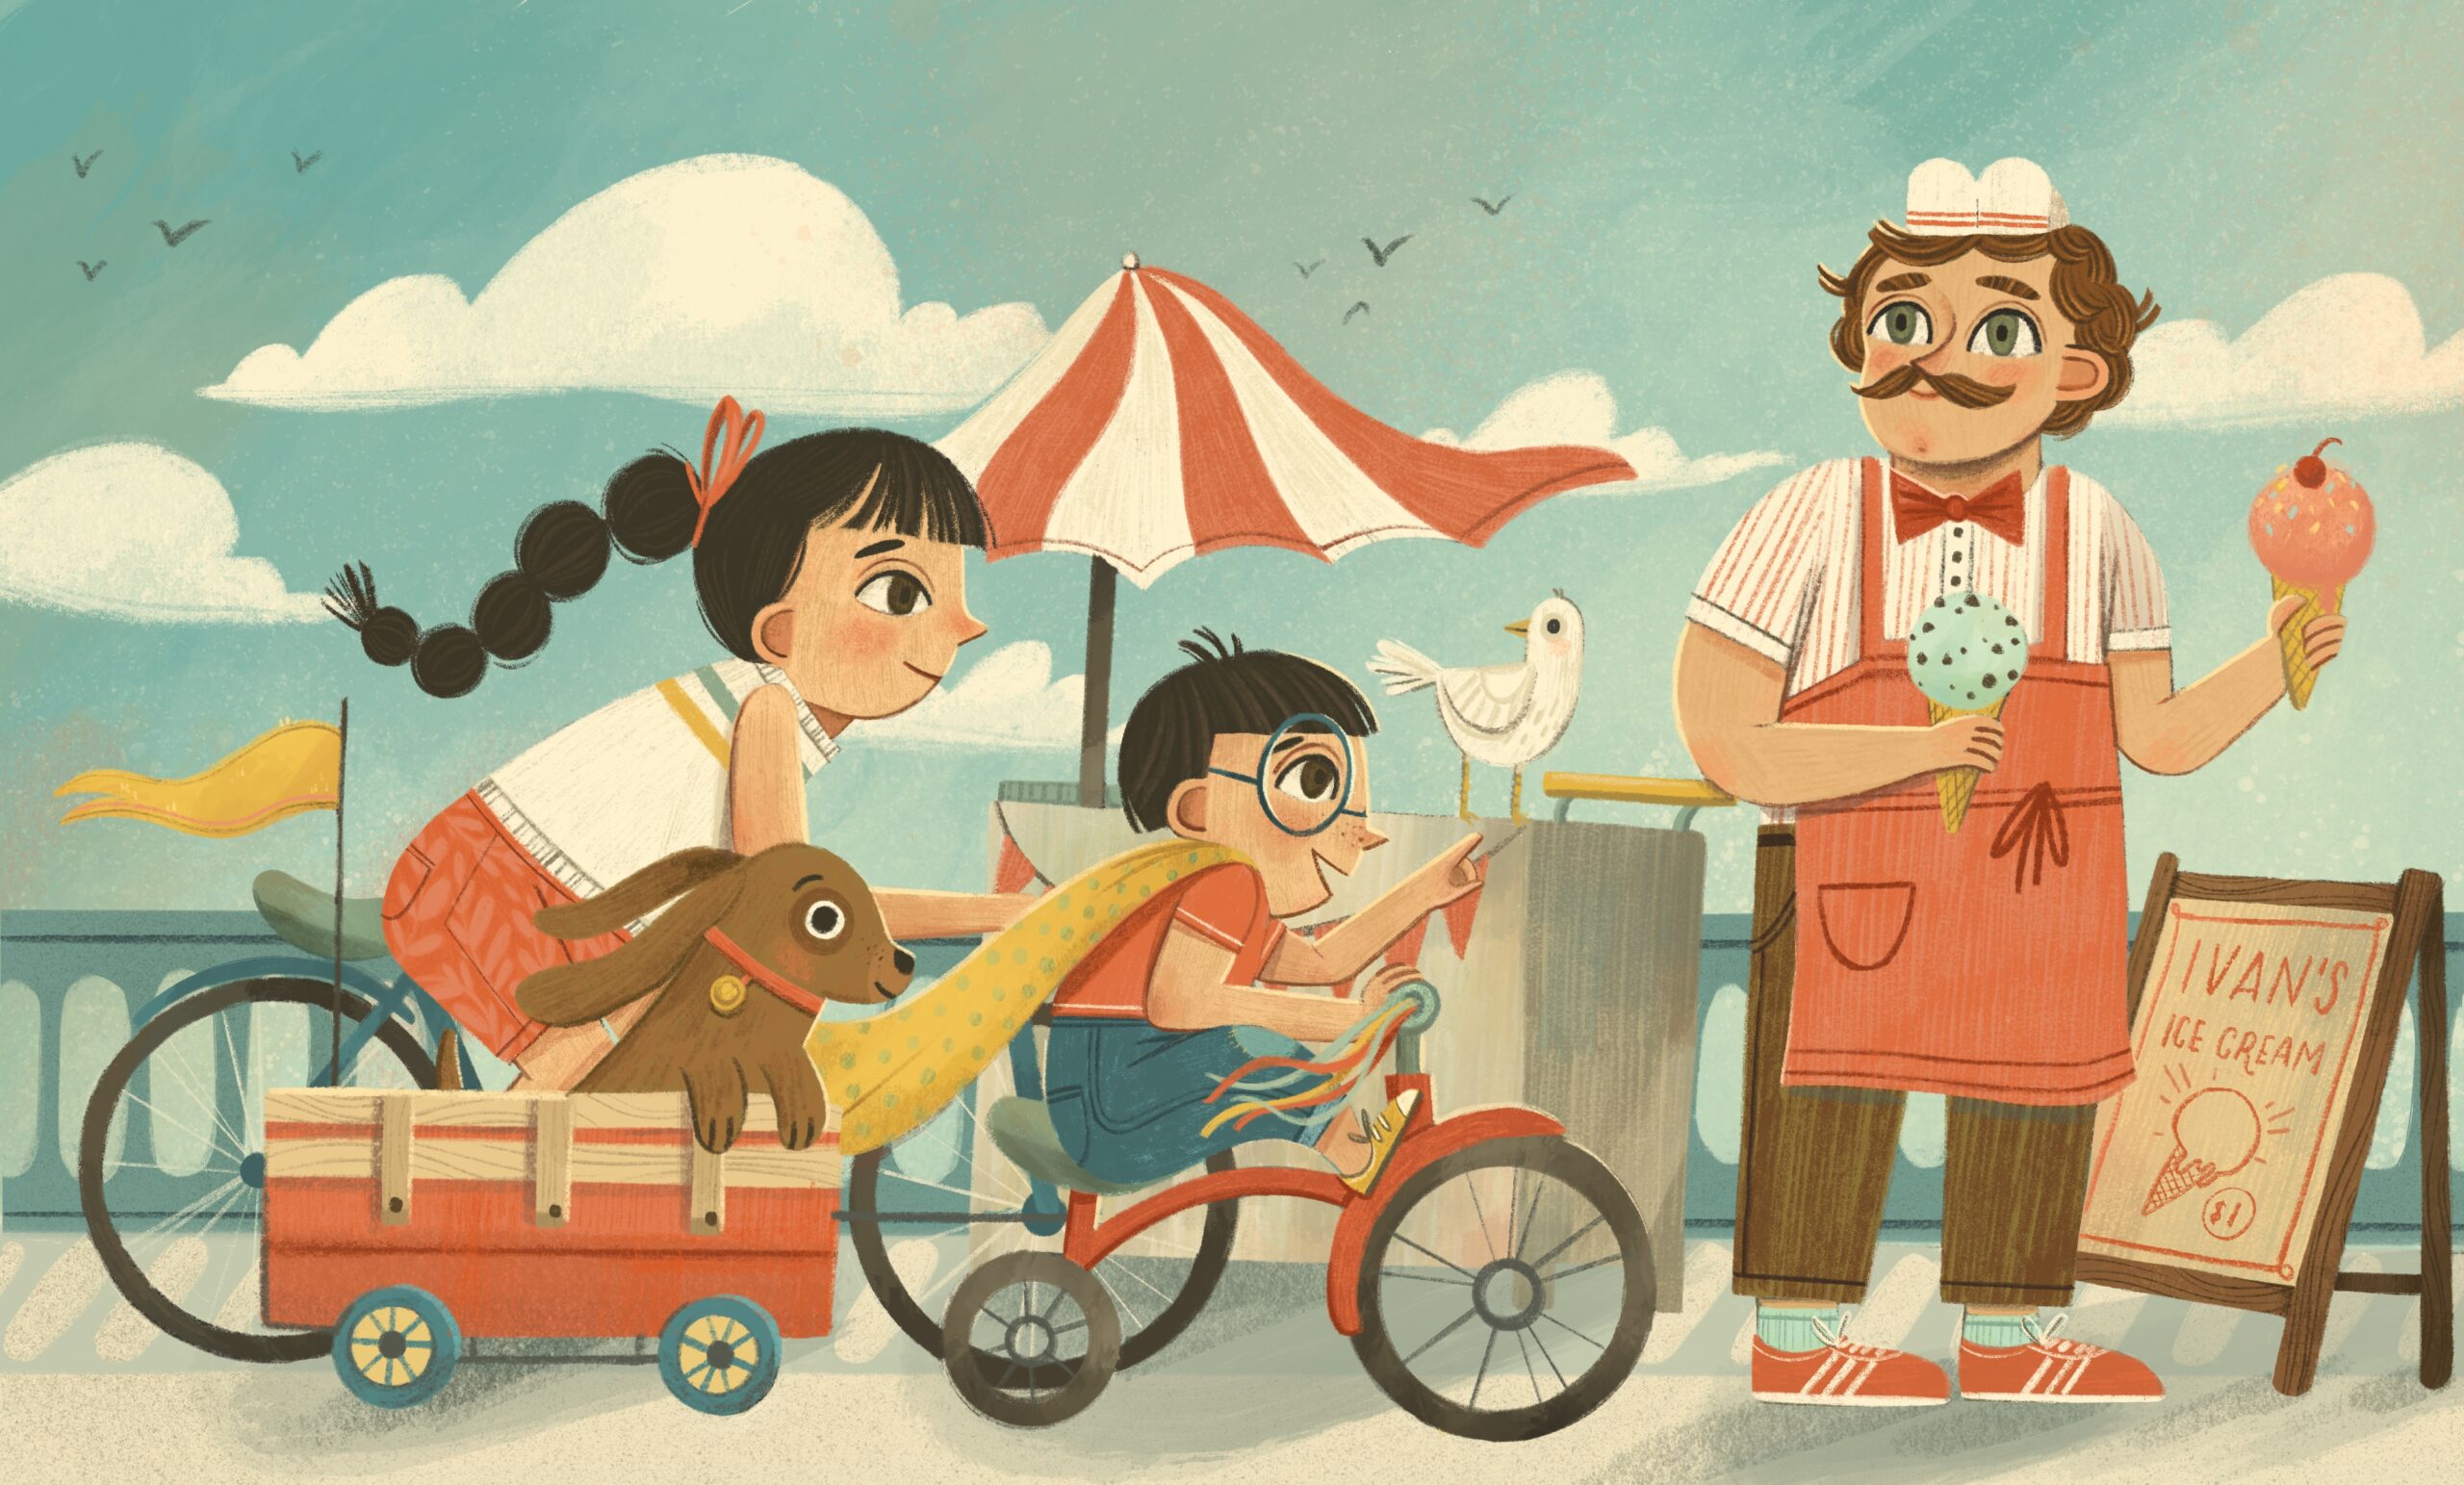 An illustration by Meneka Repka featuring an ice cream man and two children riding a bike and wagon with a dog